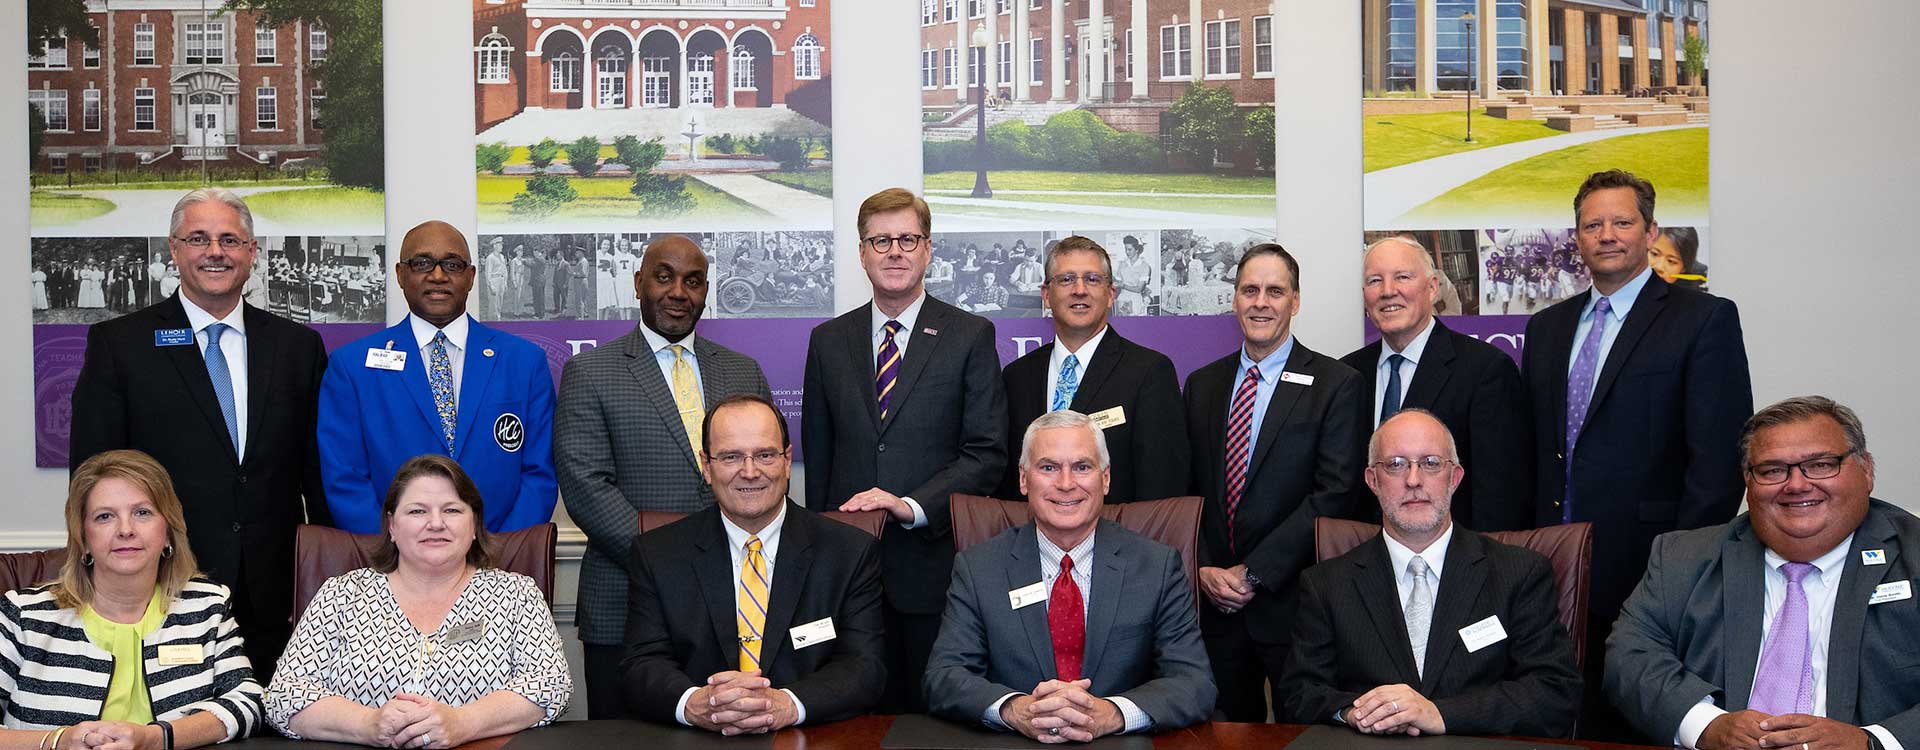 ECU Chancellor Cecil Staton, along with presidents and representatives from 14 eastern North Carolina community colleges, signed a co-admission agreement during a ceremony on June 5. (Photos by Cliff Hollis)